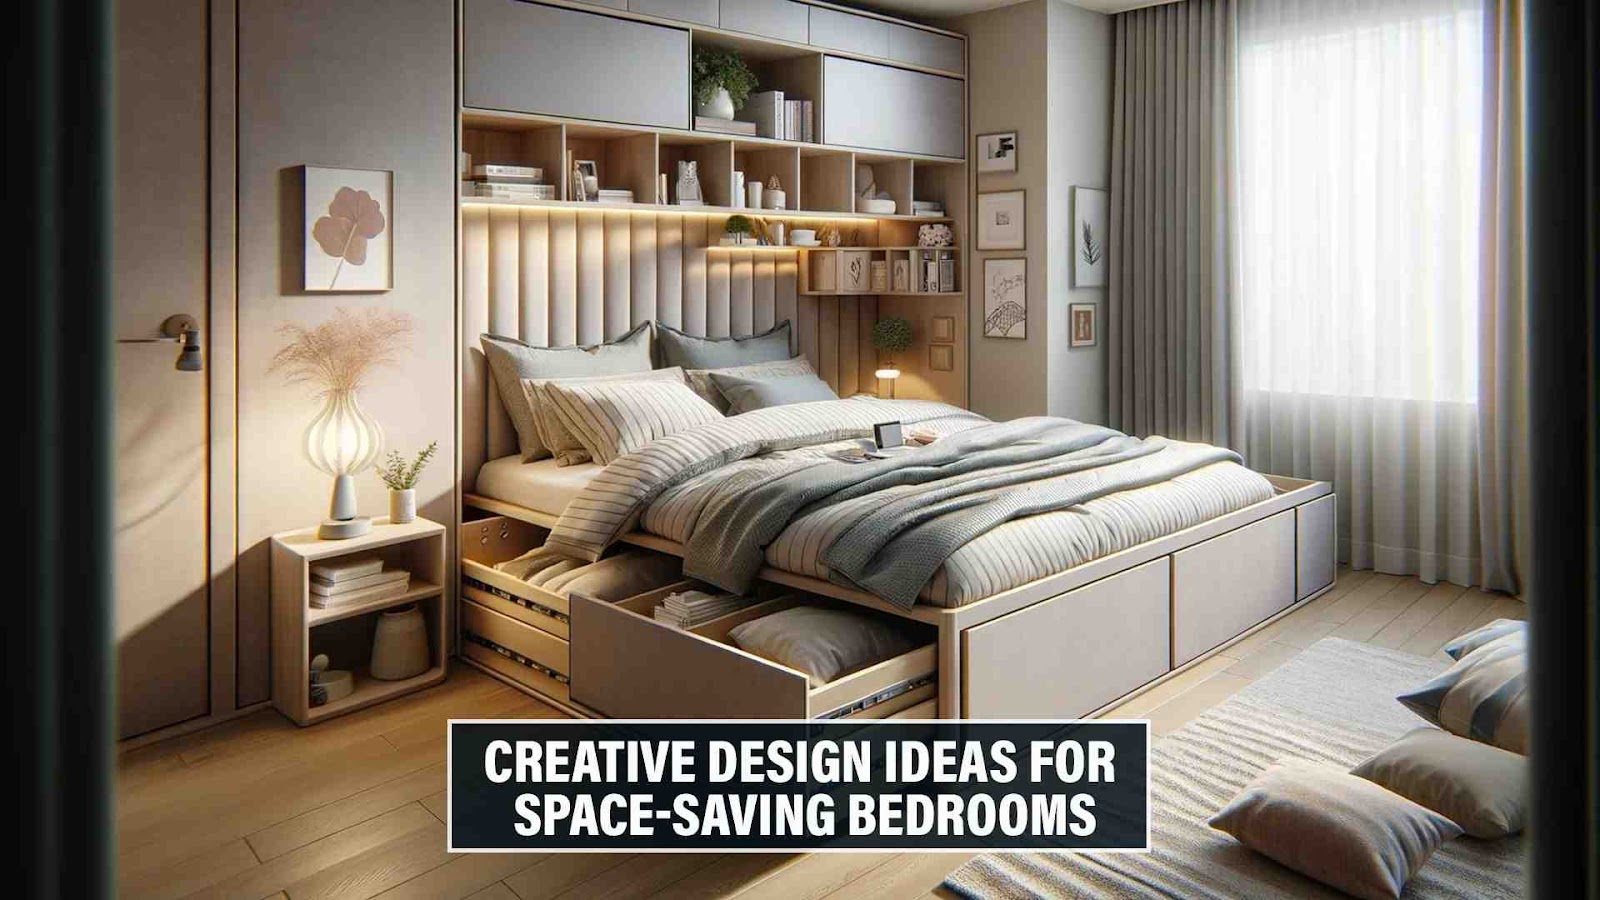 Creative Design Ideas for Space-Saving Bedrooms